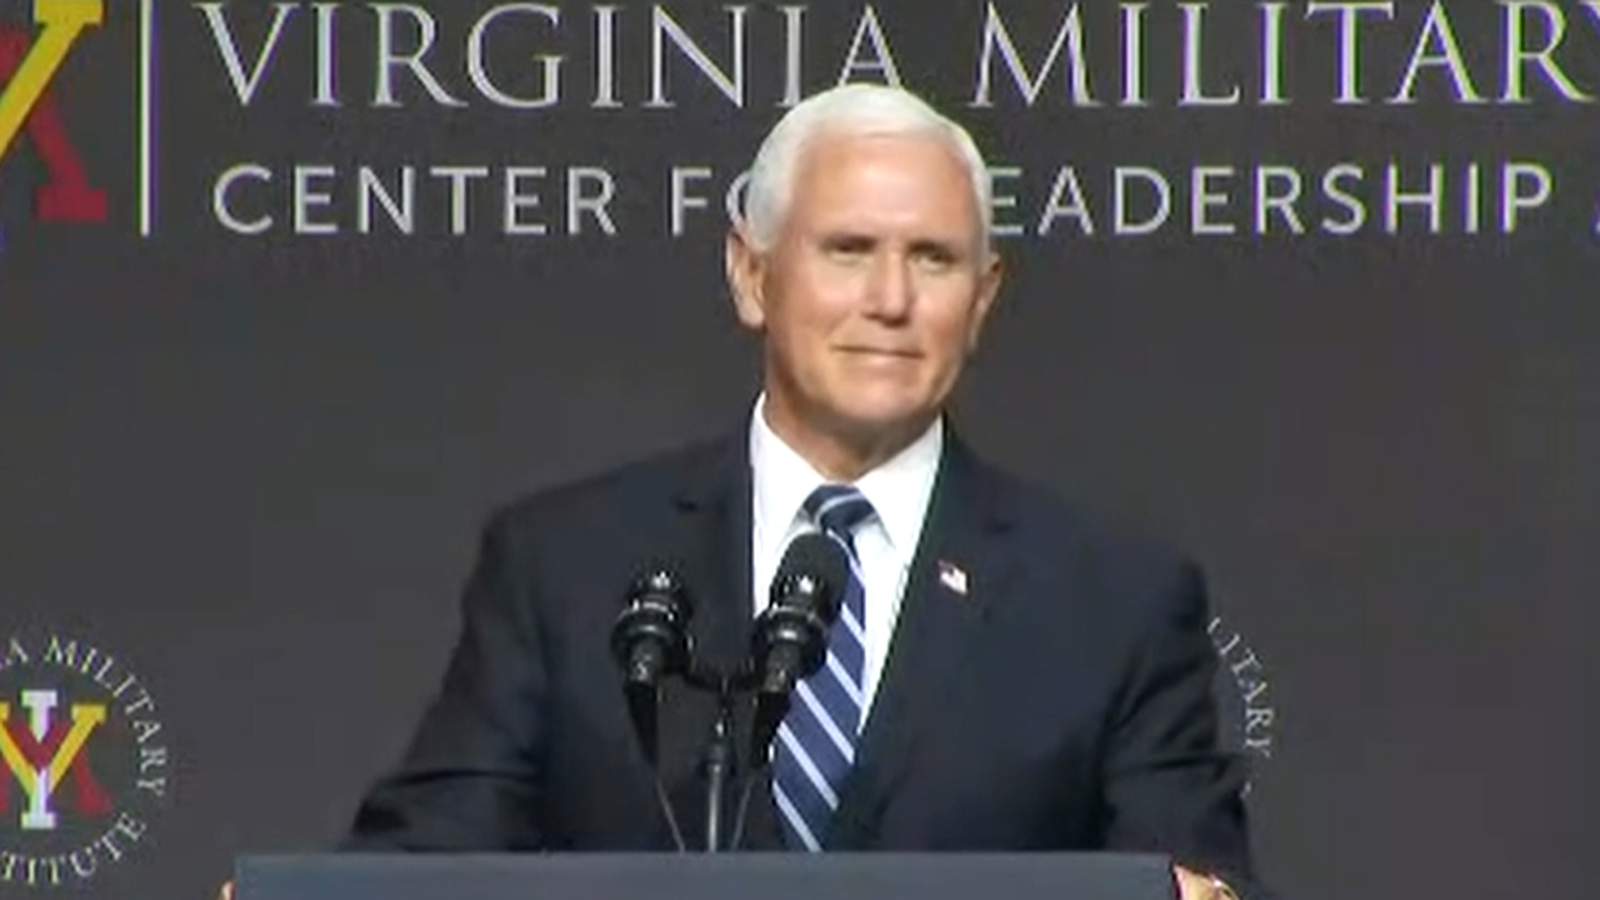 WATCH: Vice President Mike Pence speaks to cadets at VMI